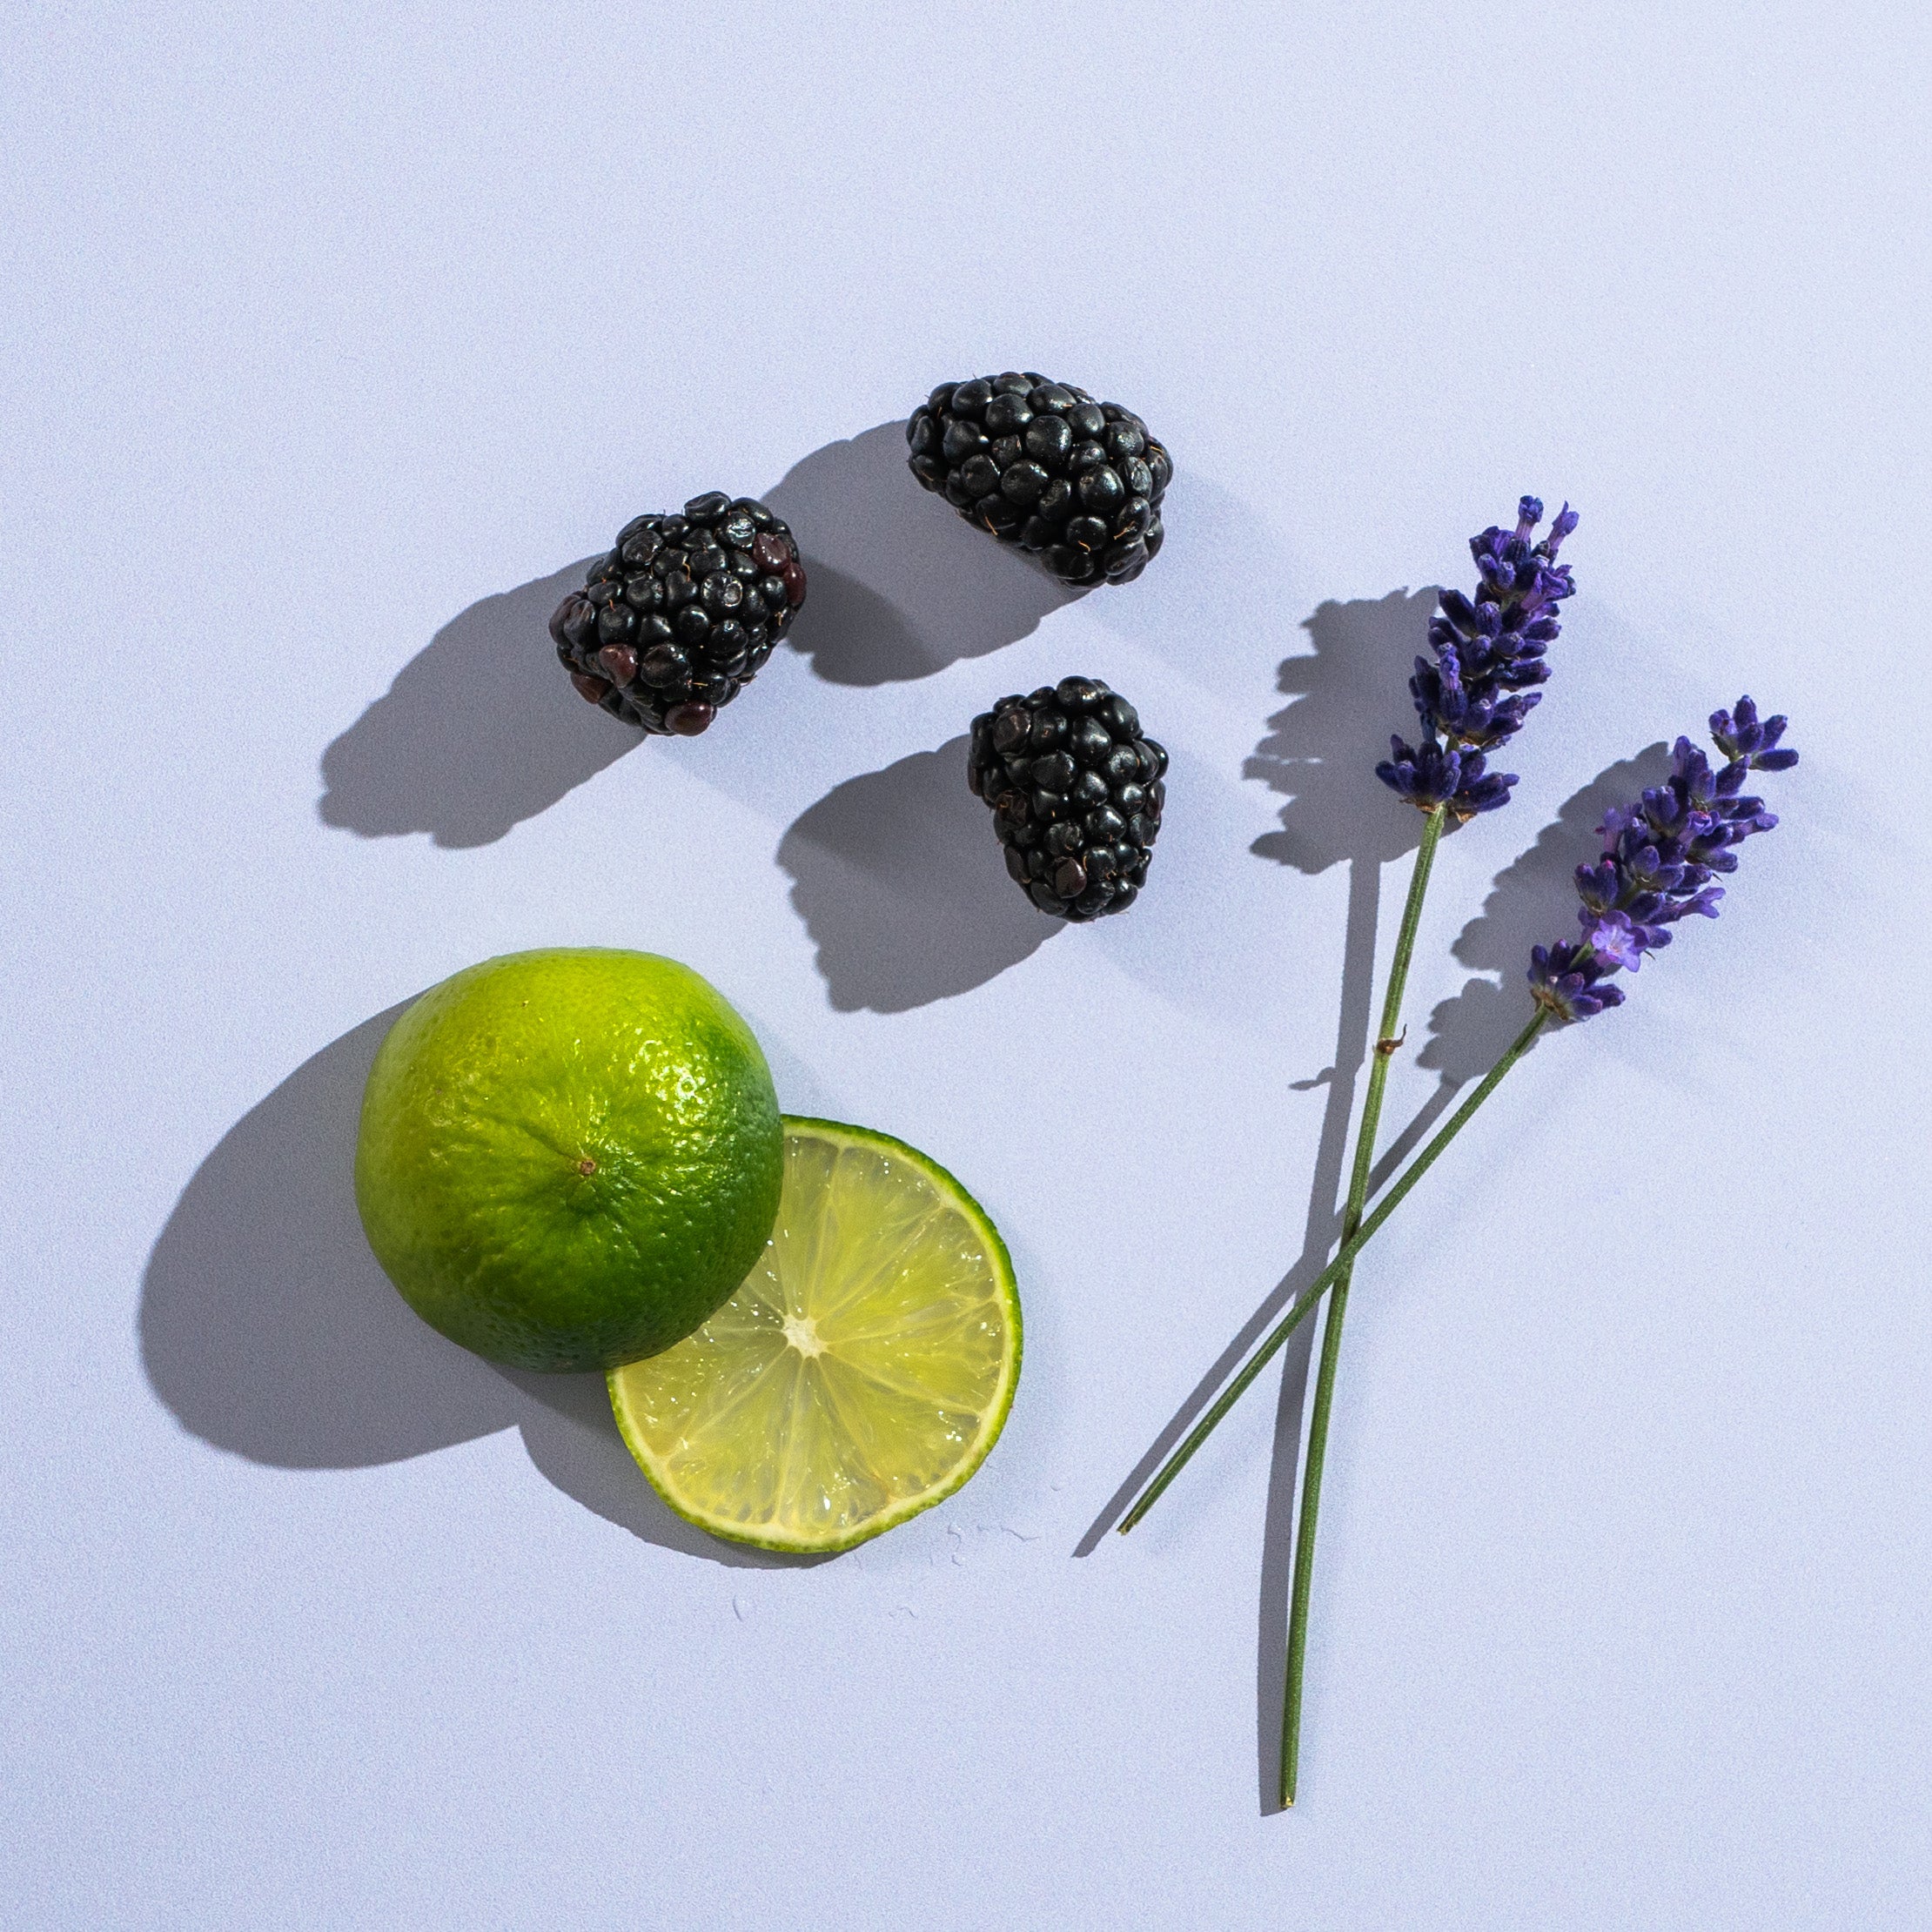 Blackberry, Lime & Lavender Alcoholic Cordial Ingredients